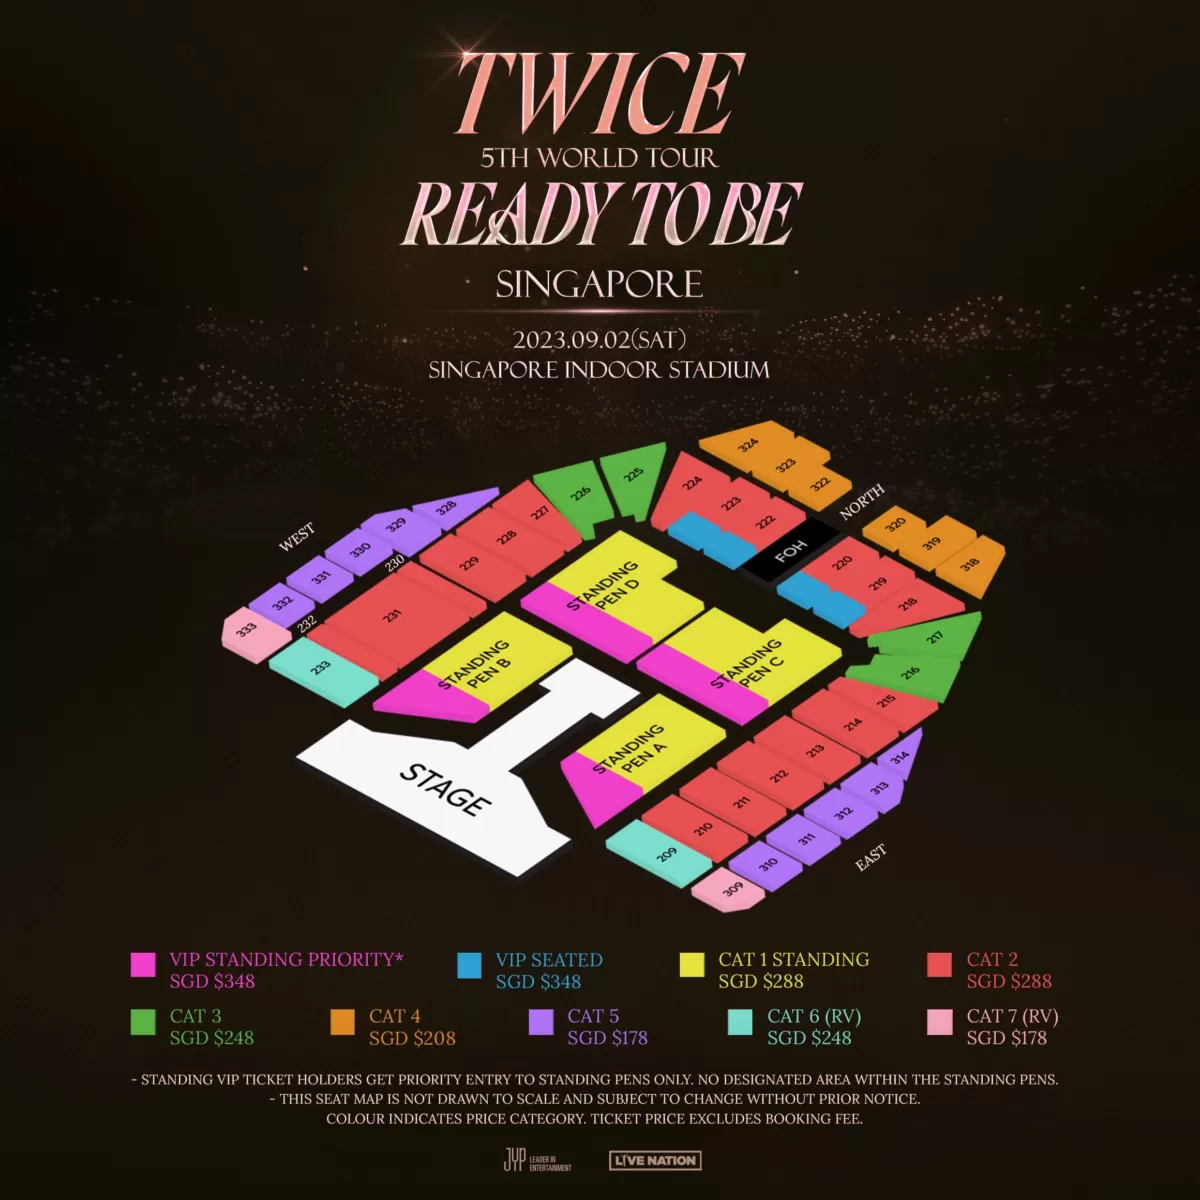 TWICE To Return To Singapore After 4 Years For 'READY TO BE' World Tour